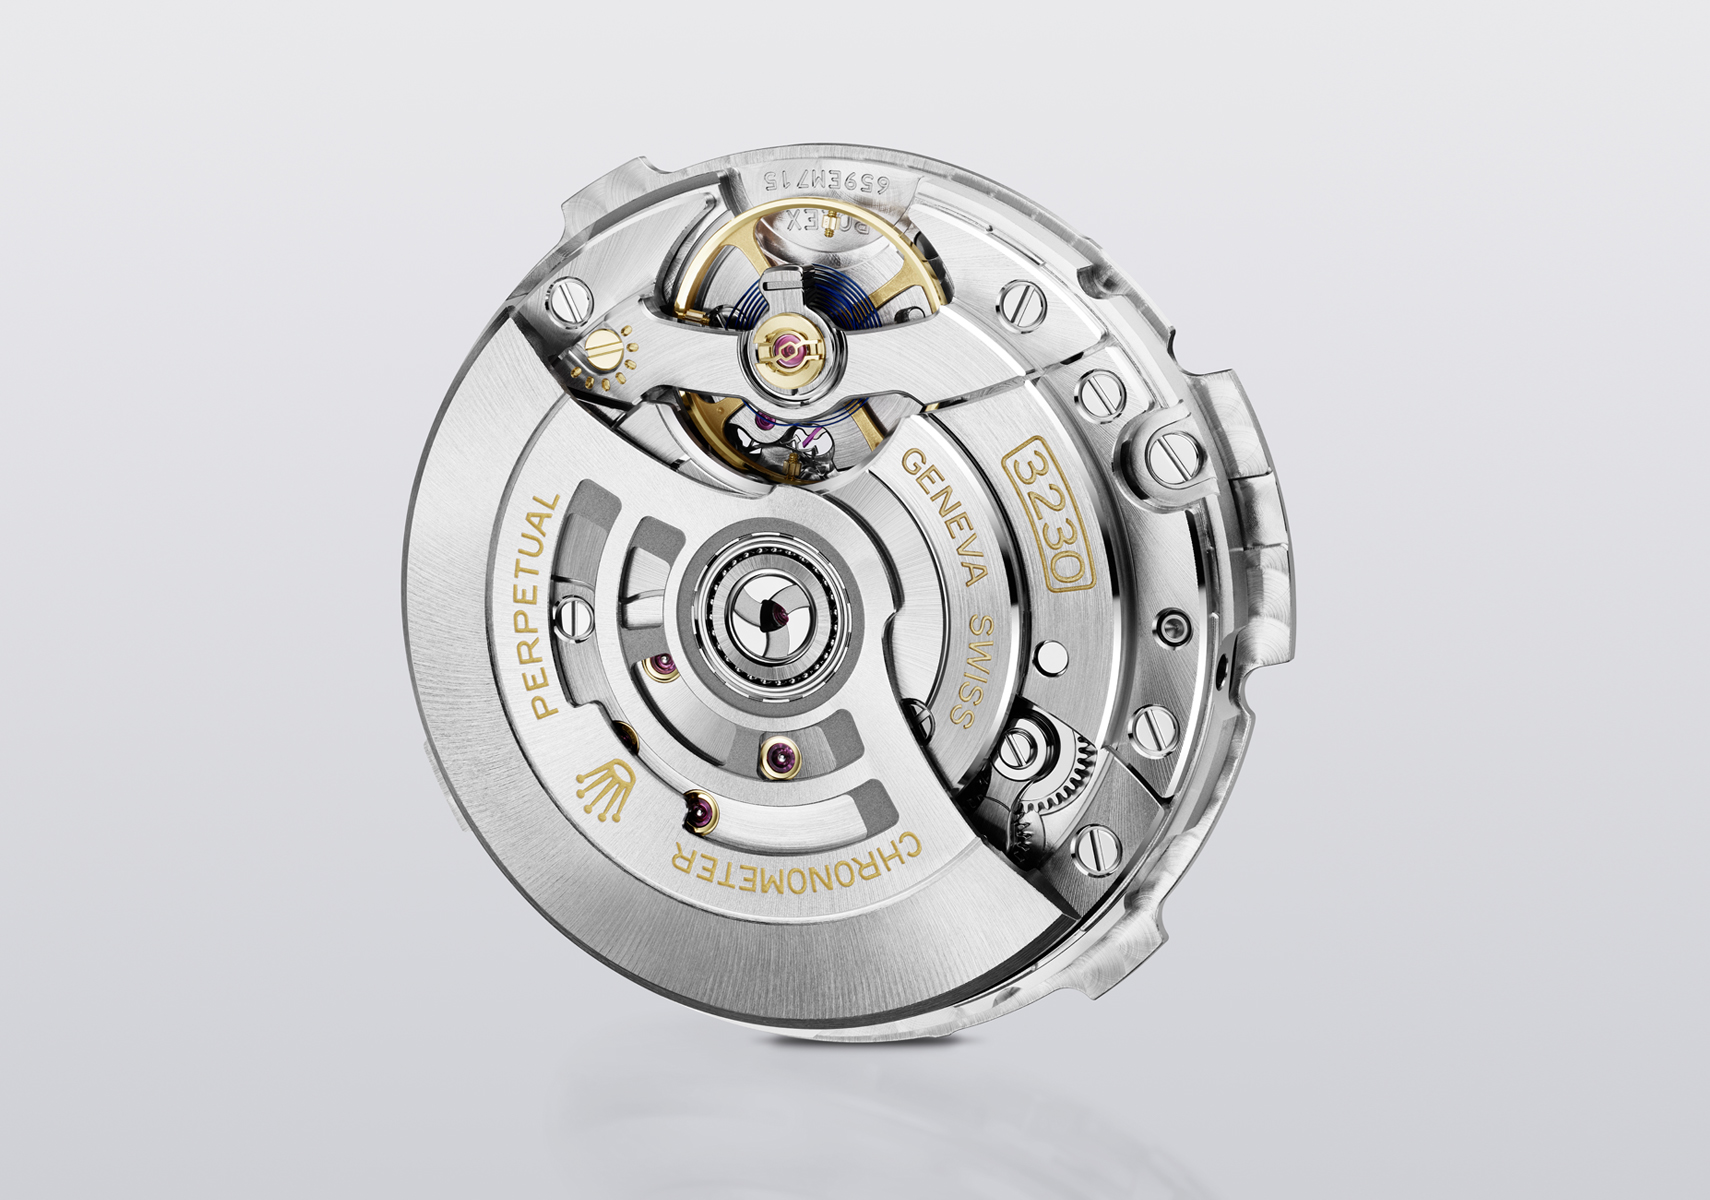 Movement 3230 C equips the Oyster Perpetual 41, Air-King